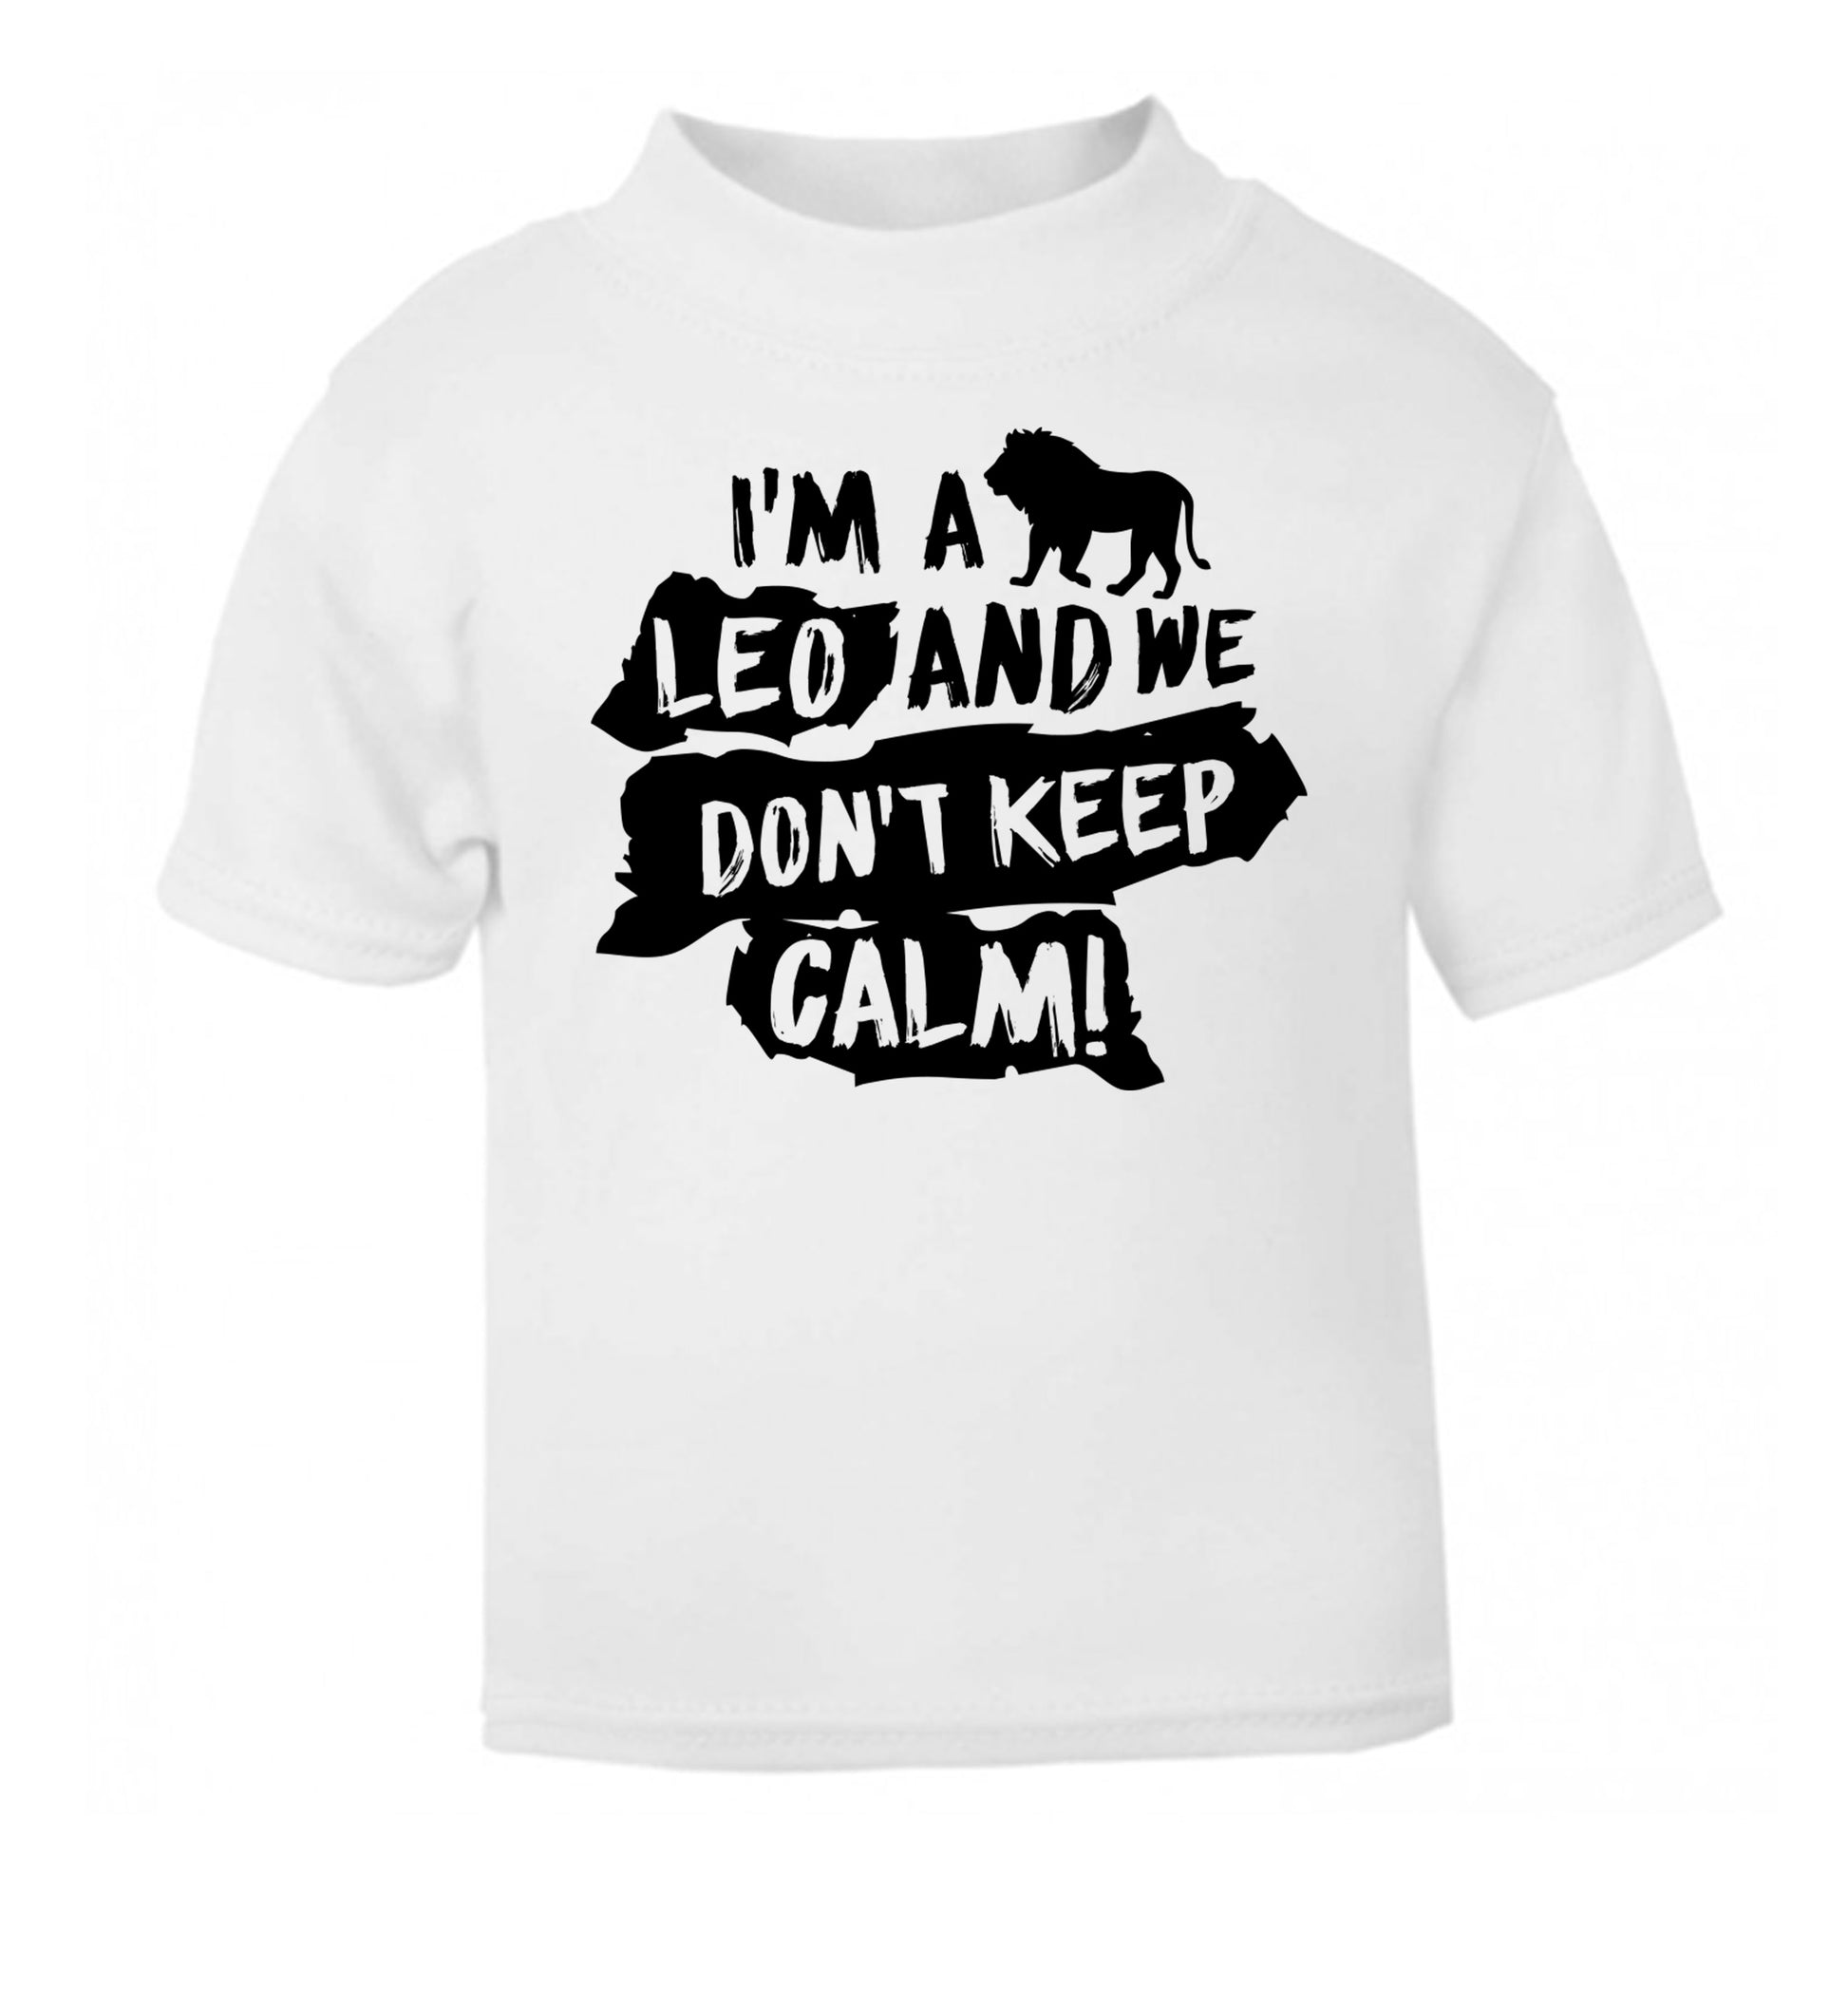 I'm a leo and we don't keep calm! white Baby Toddler Tshirt 2 Years